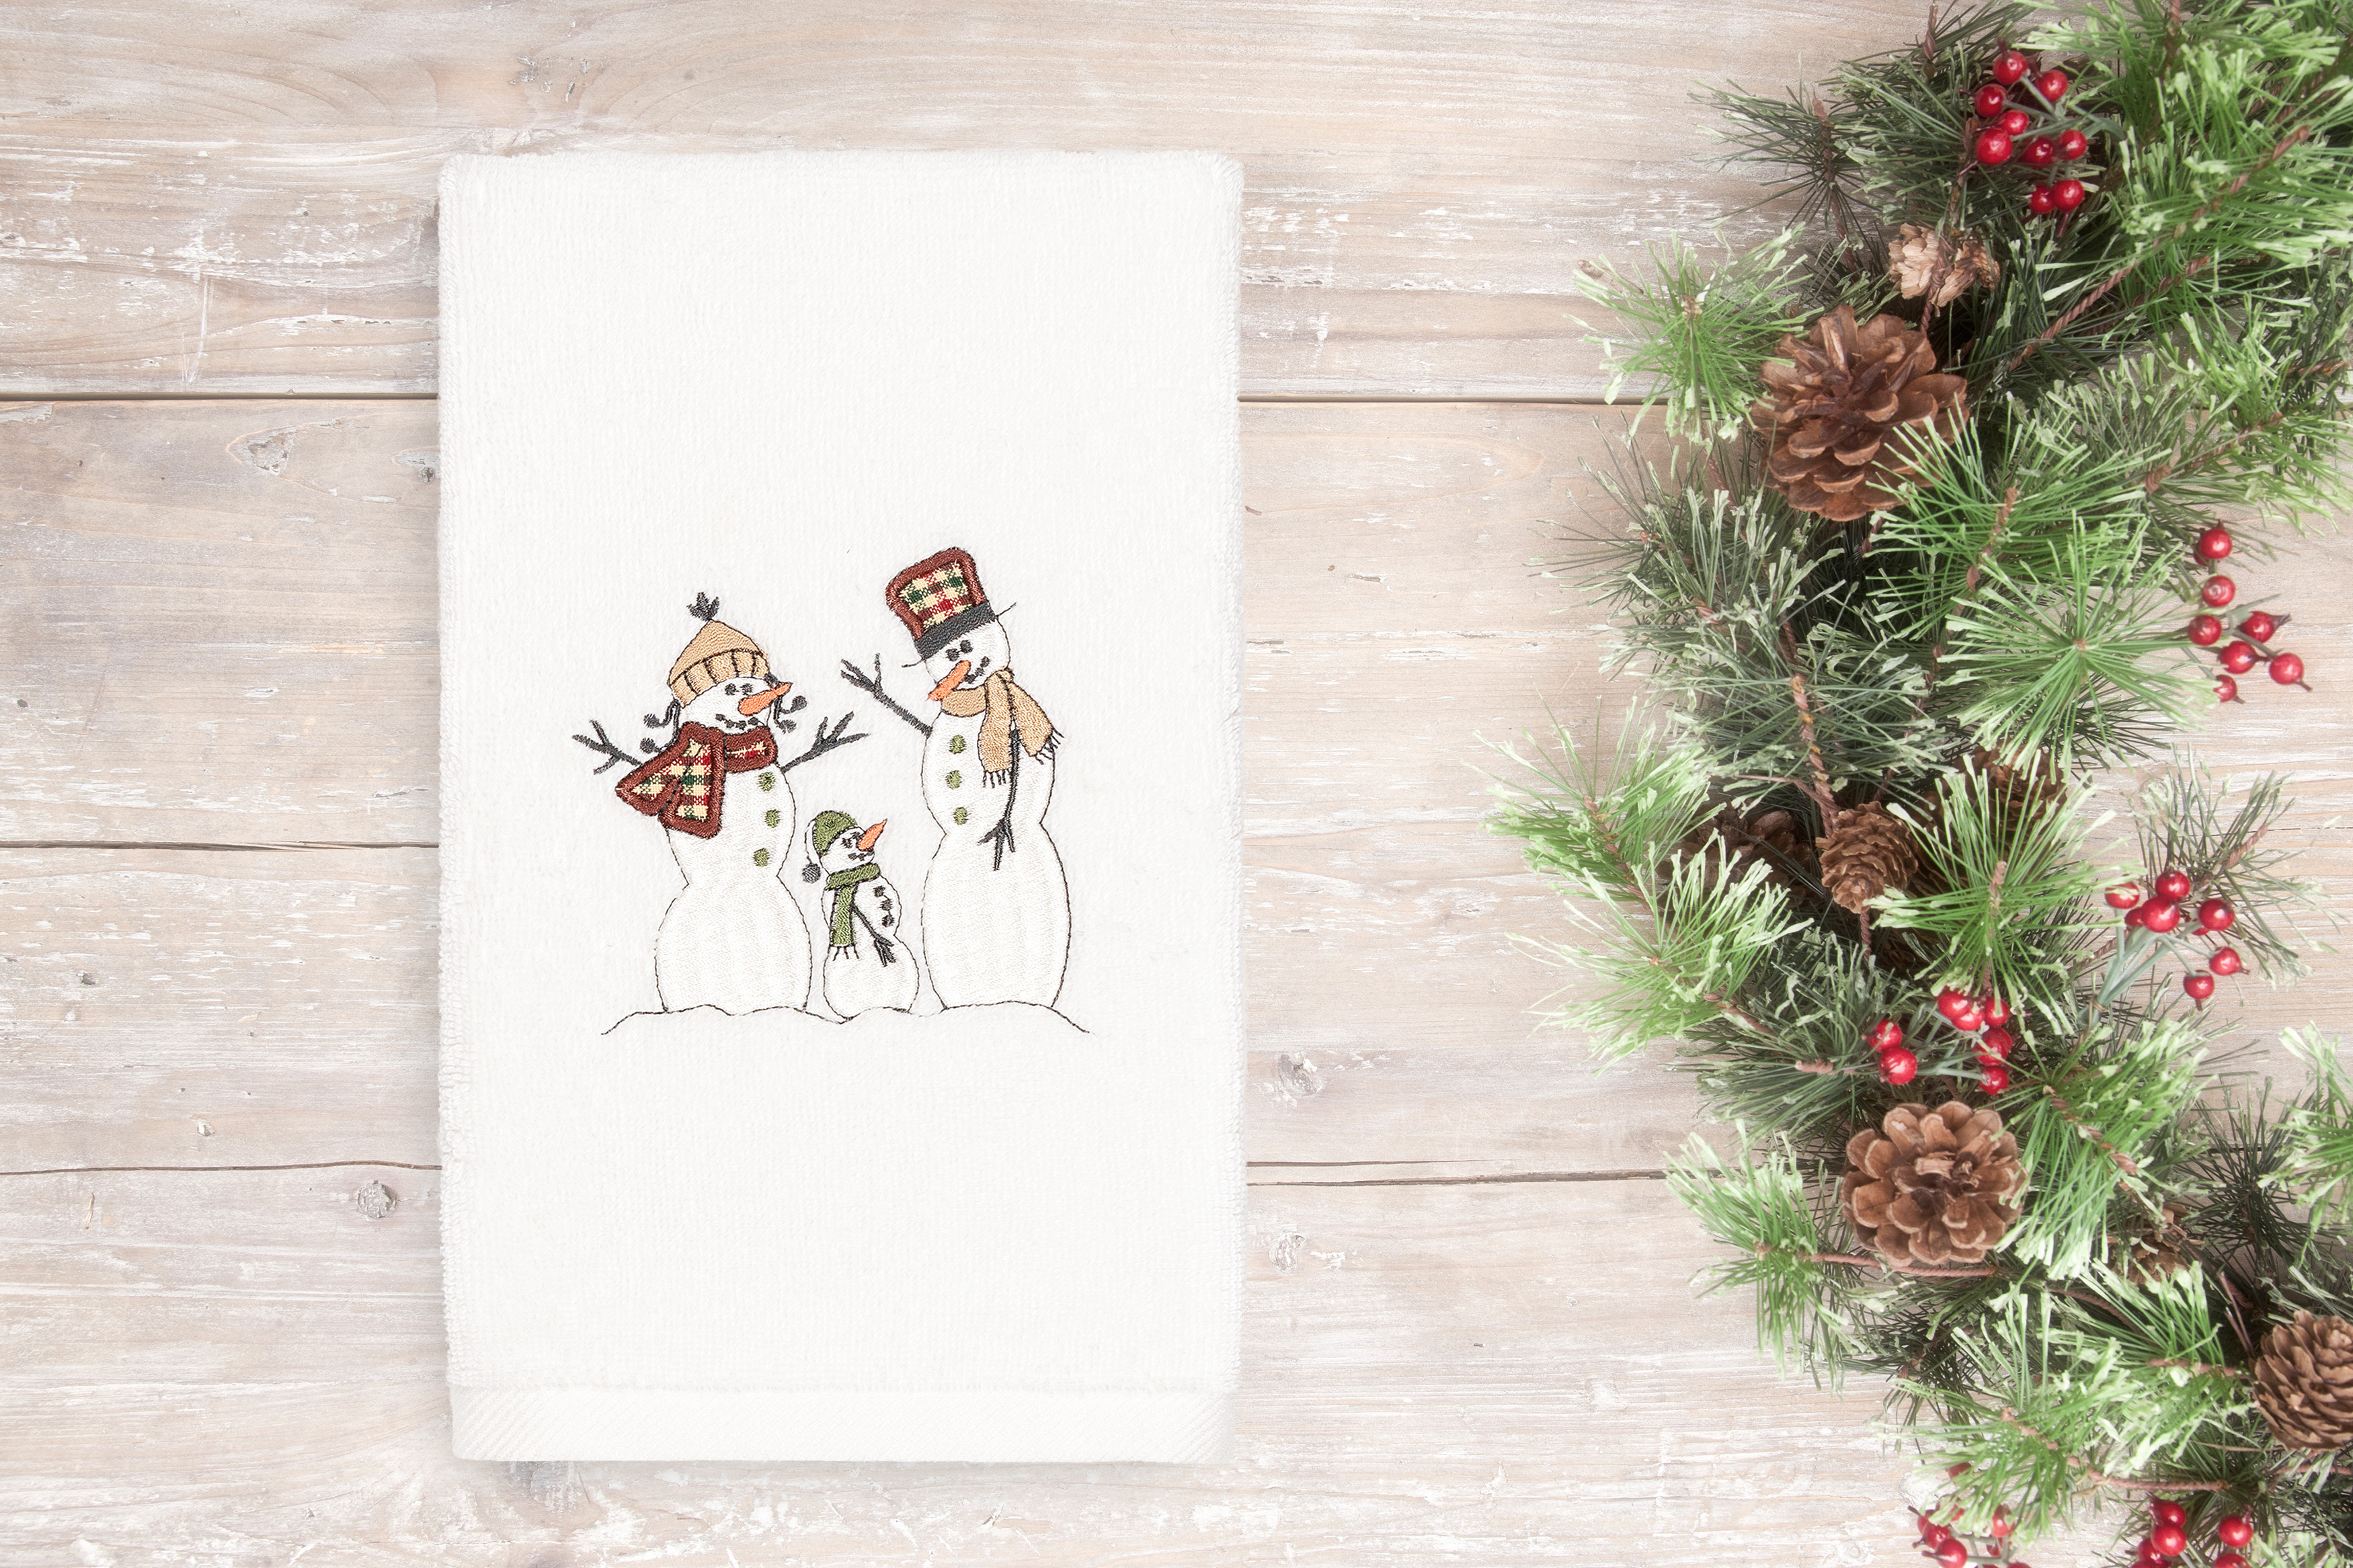 Linum Home Christmas Snow Family Embroidered White Turkish Cotton Hand Towel - image 1 of 2